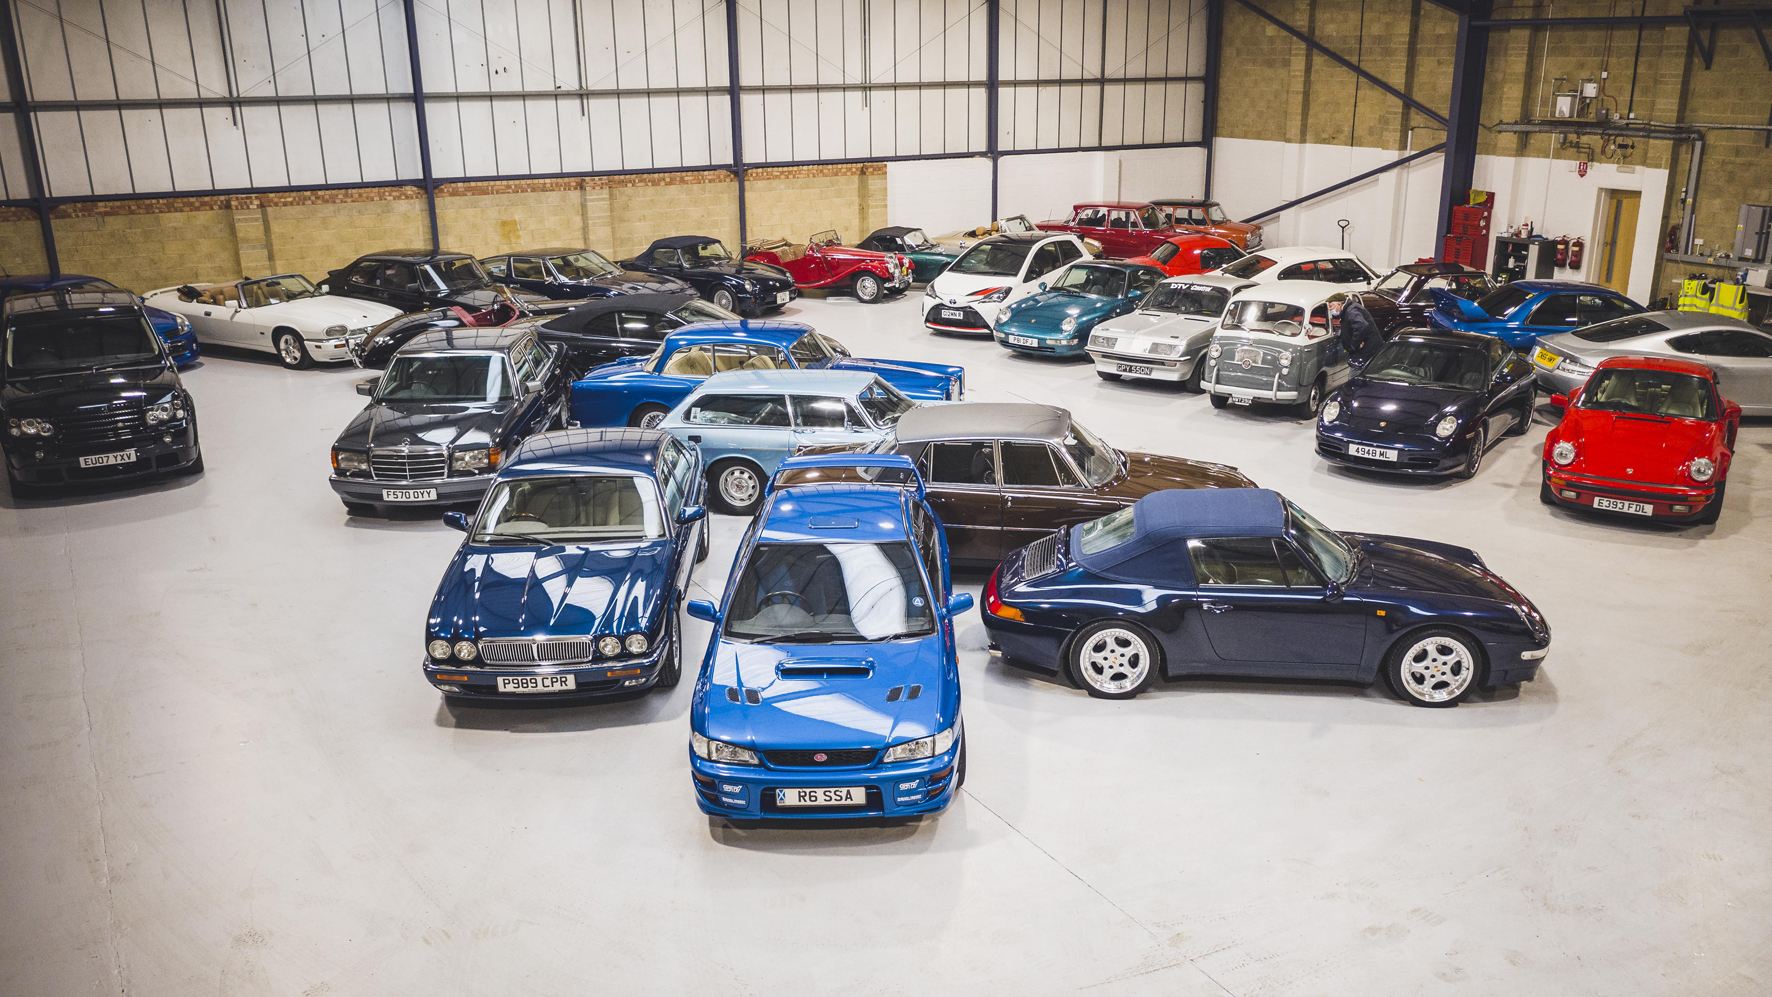 Market watch: How classic car auctions have performed in the first six months of 2021